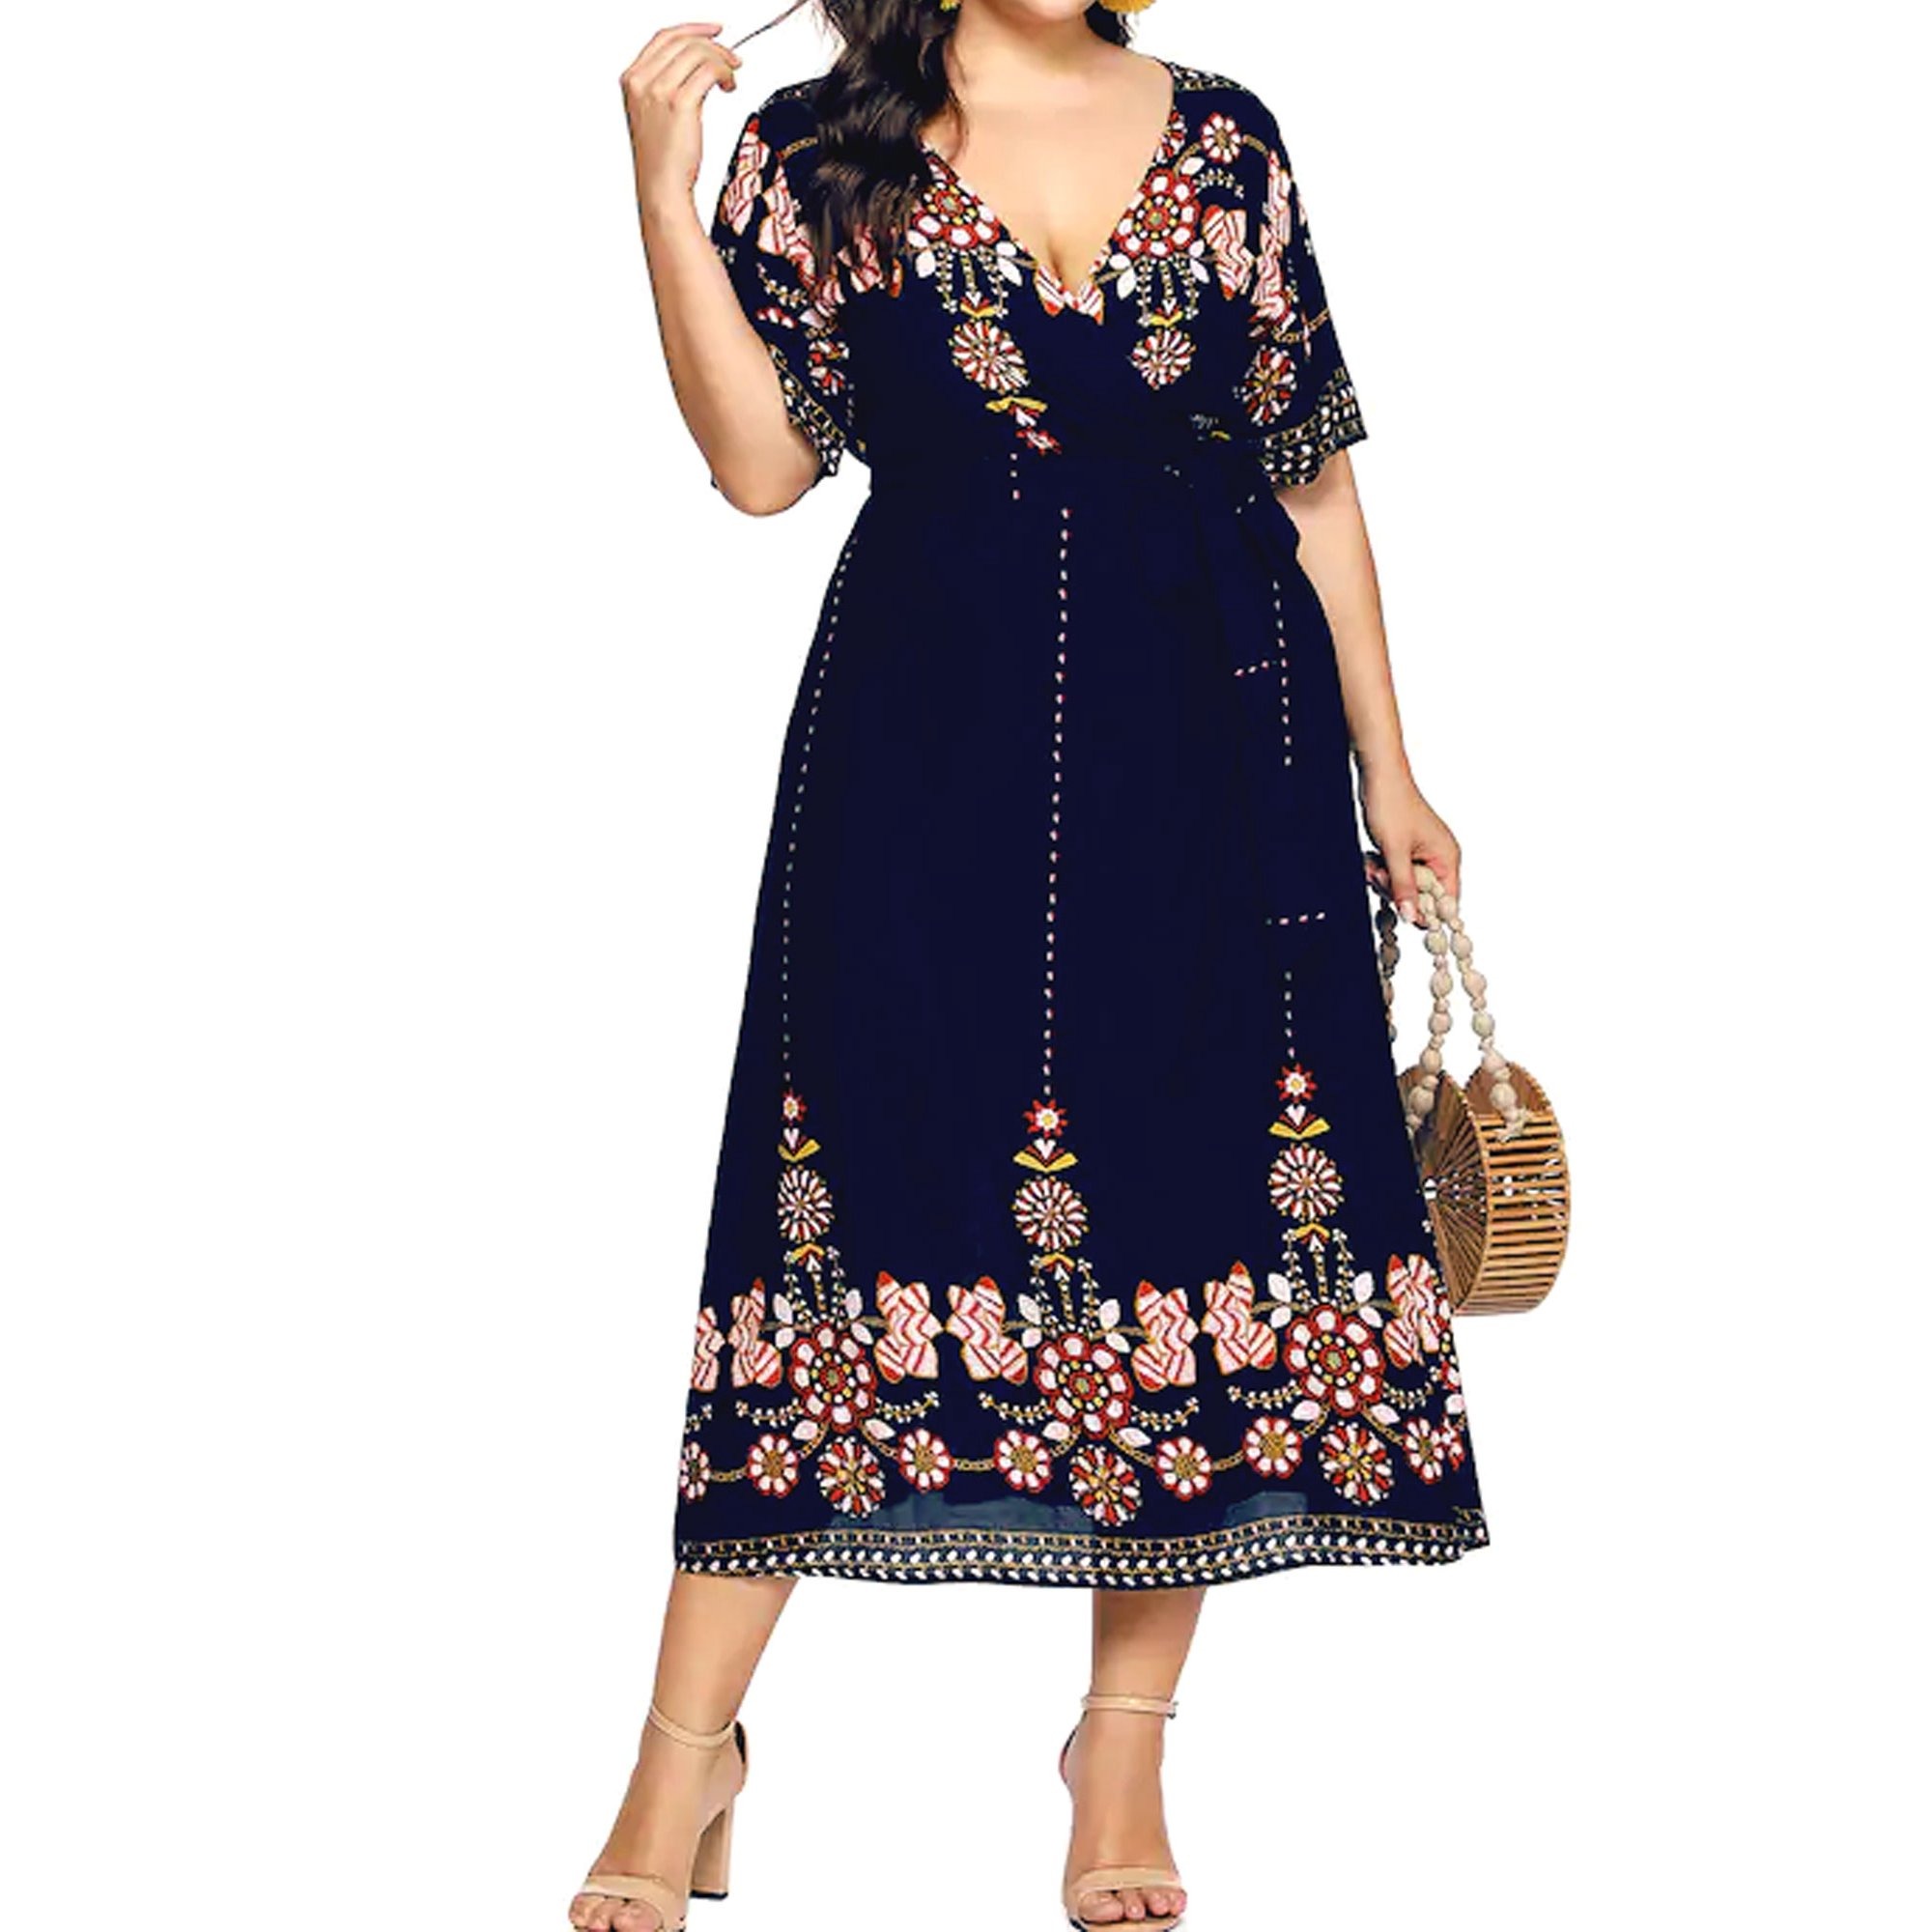 Tips For Buying Plus Size Dresses